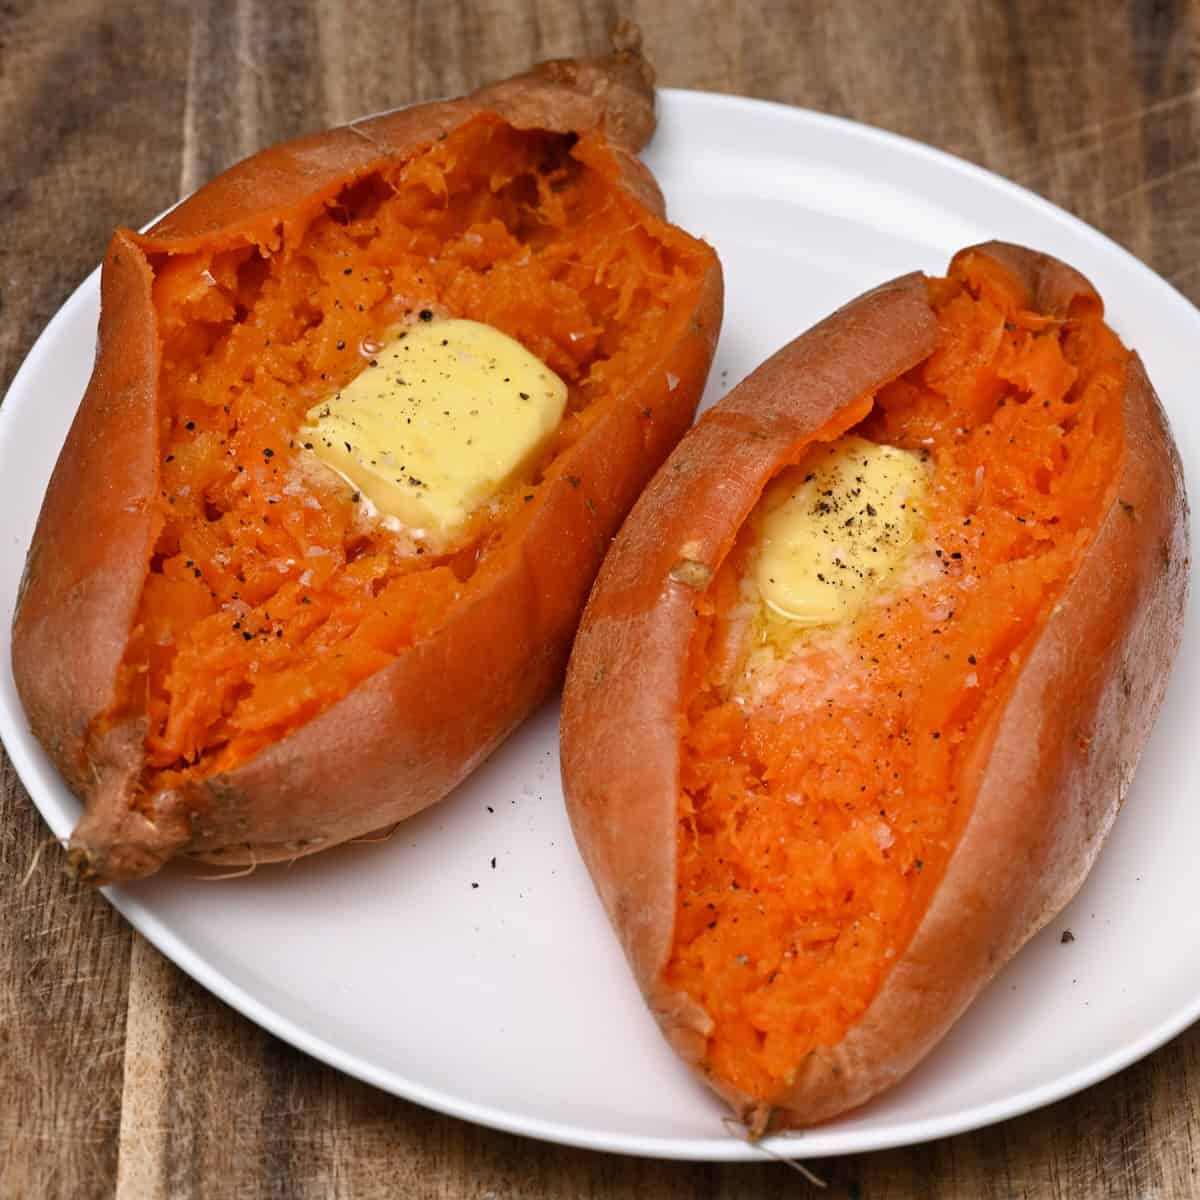 Two microwaves sweet potatoes topped with a bit of butter and pepper